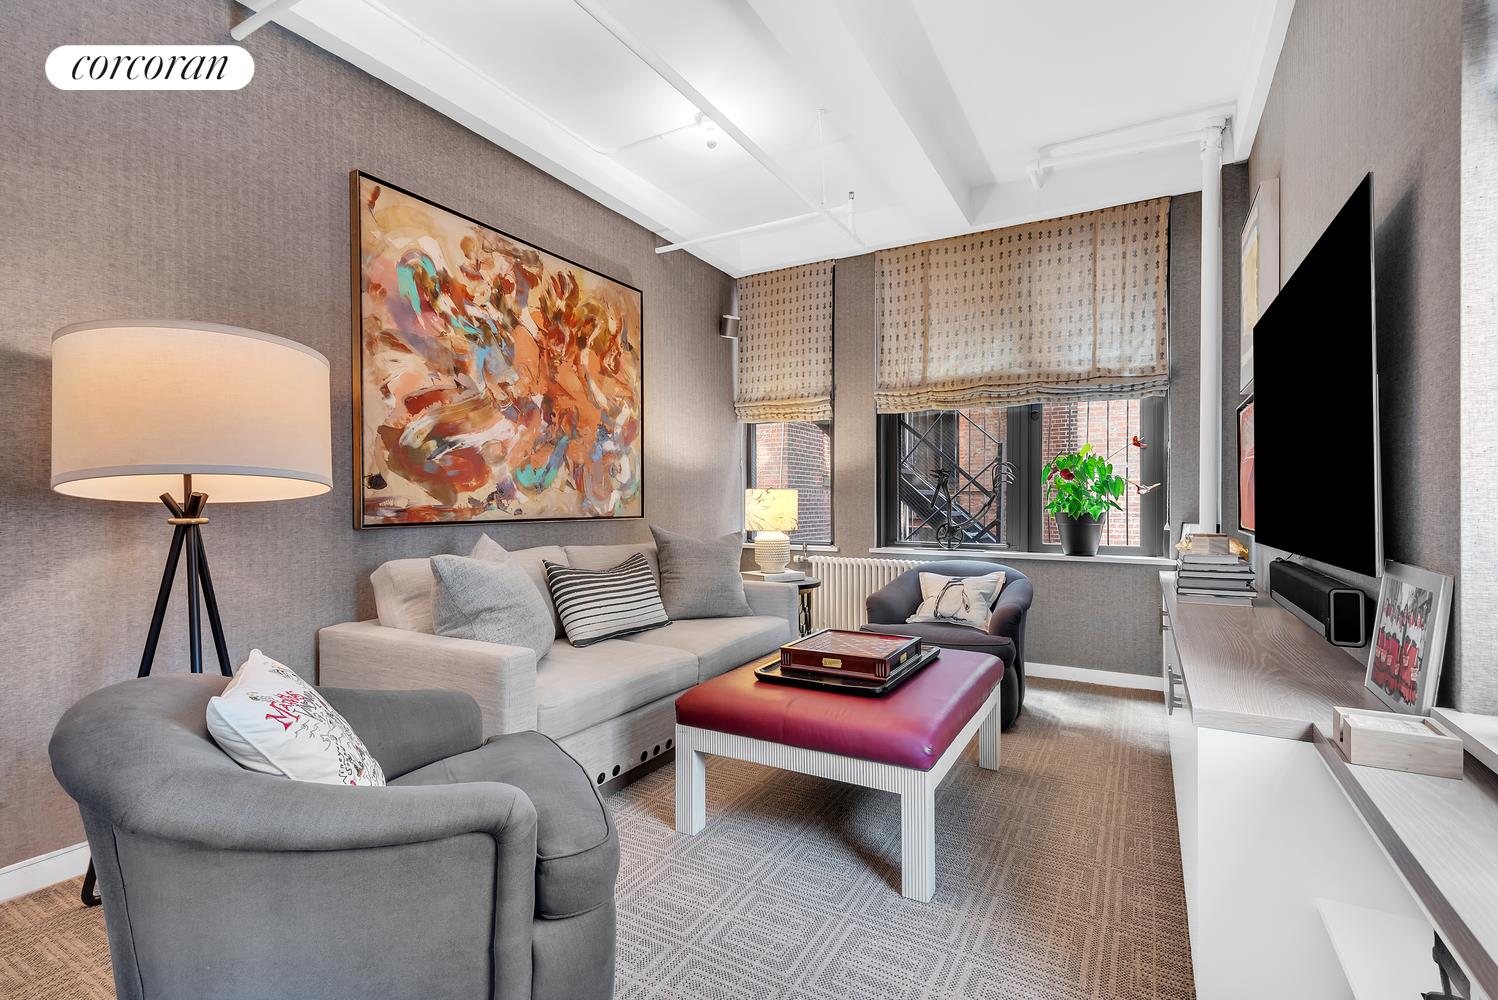 24 West 30th Street 6thfl, Nomad, Downtown, NYC - 3 Bedrooms  
3 Bathrooms  
7 Rooms - 